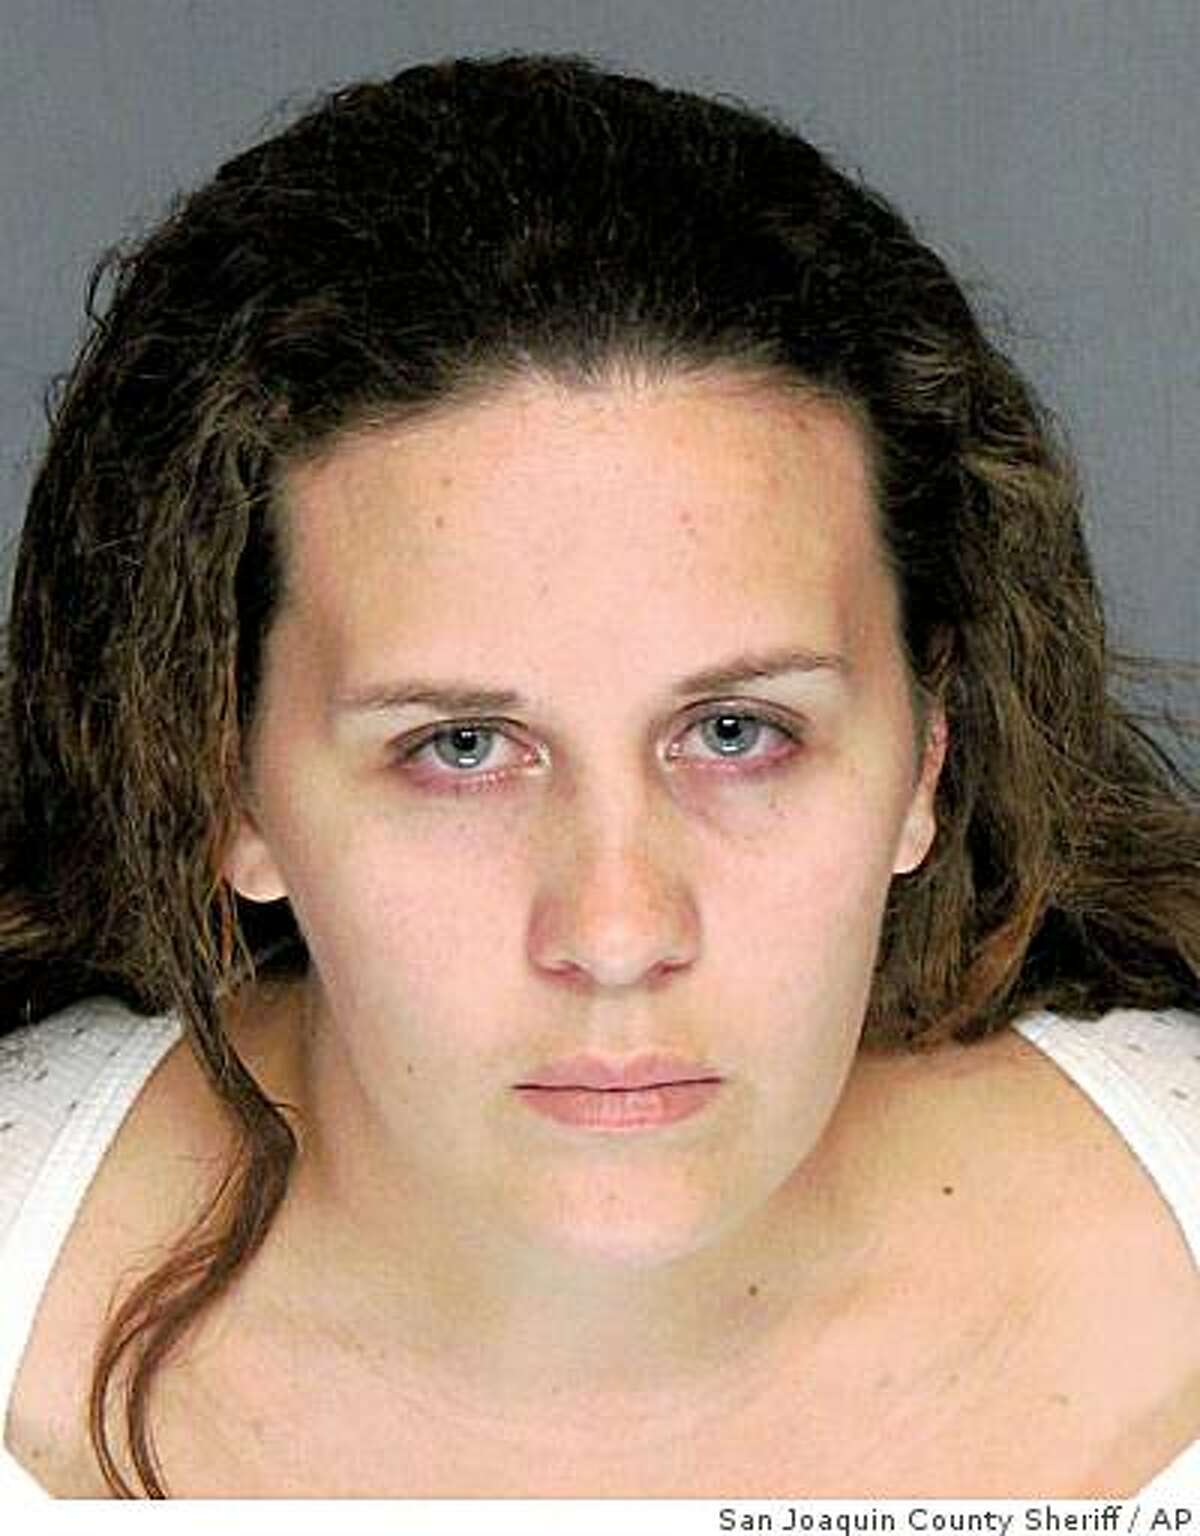 This image provided by the San Joaquin County Seriff's department shows the booking photo of Melissa Huckaby taken Saturday April 11, 2009. Huckaby, a Sunday school teacher, has been arrested and charged with kidnapping and killing a California girl whose body was found in a suitcase. Tracy Police Sgt. Tony Sheneman says 28-year-old Melissa Huckaby was arrested late Friday night after voluntarily going to police for questioning about the death of 8-year-old Sandra Cantu. (AP Photo/San Joaquin County Sheriff)